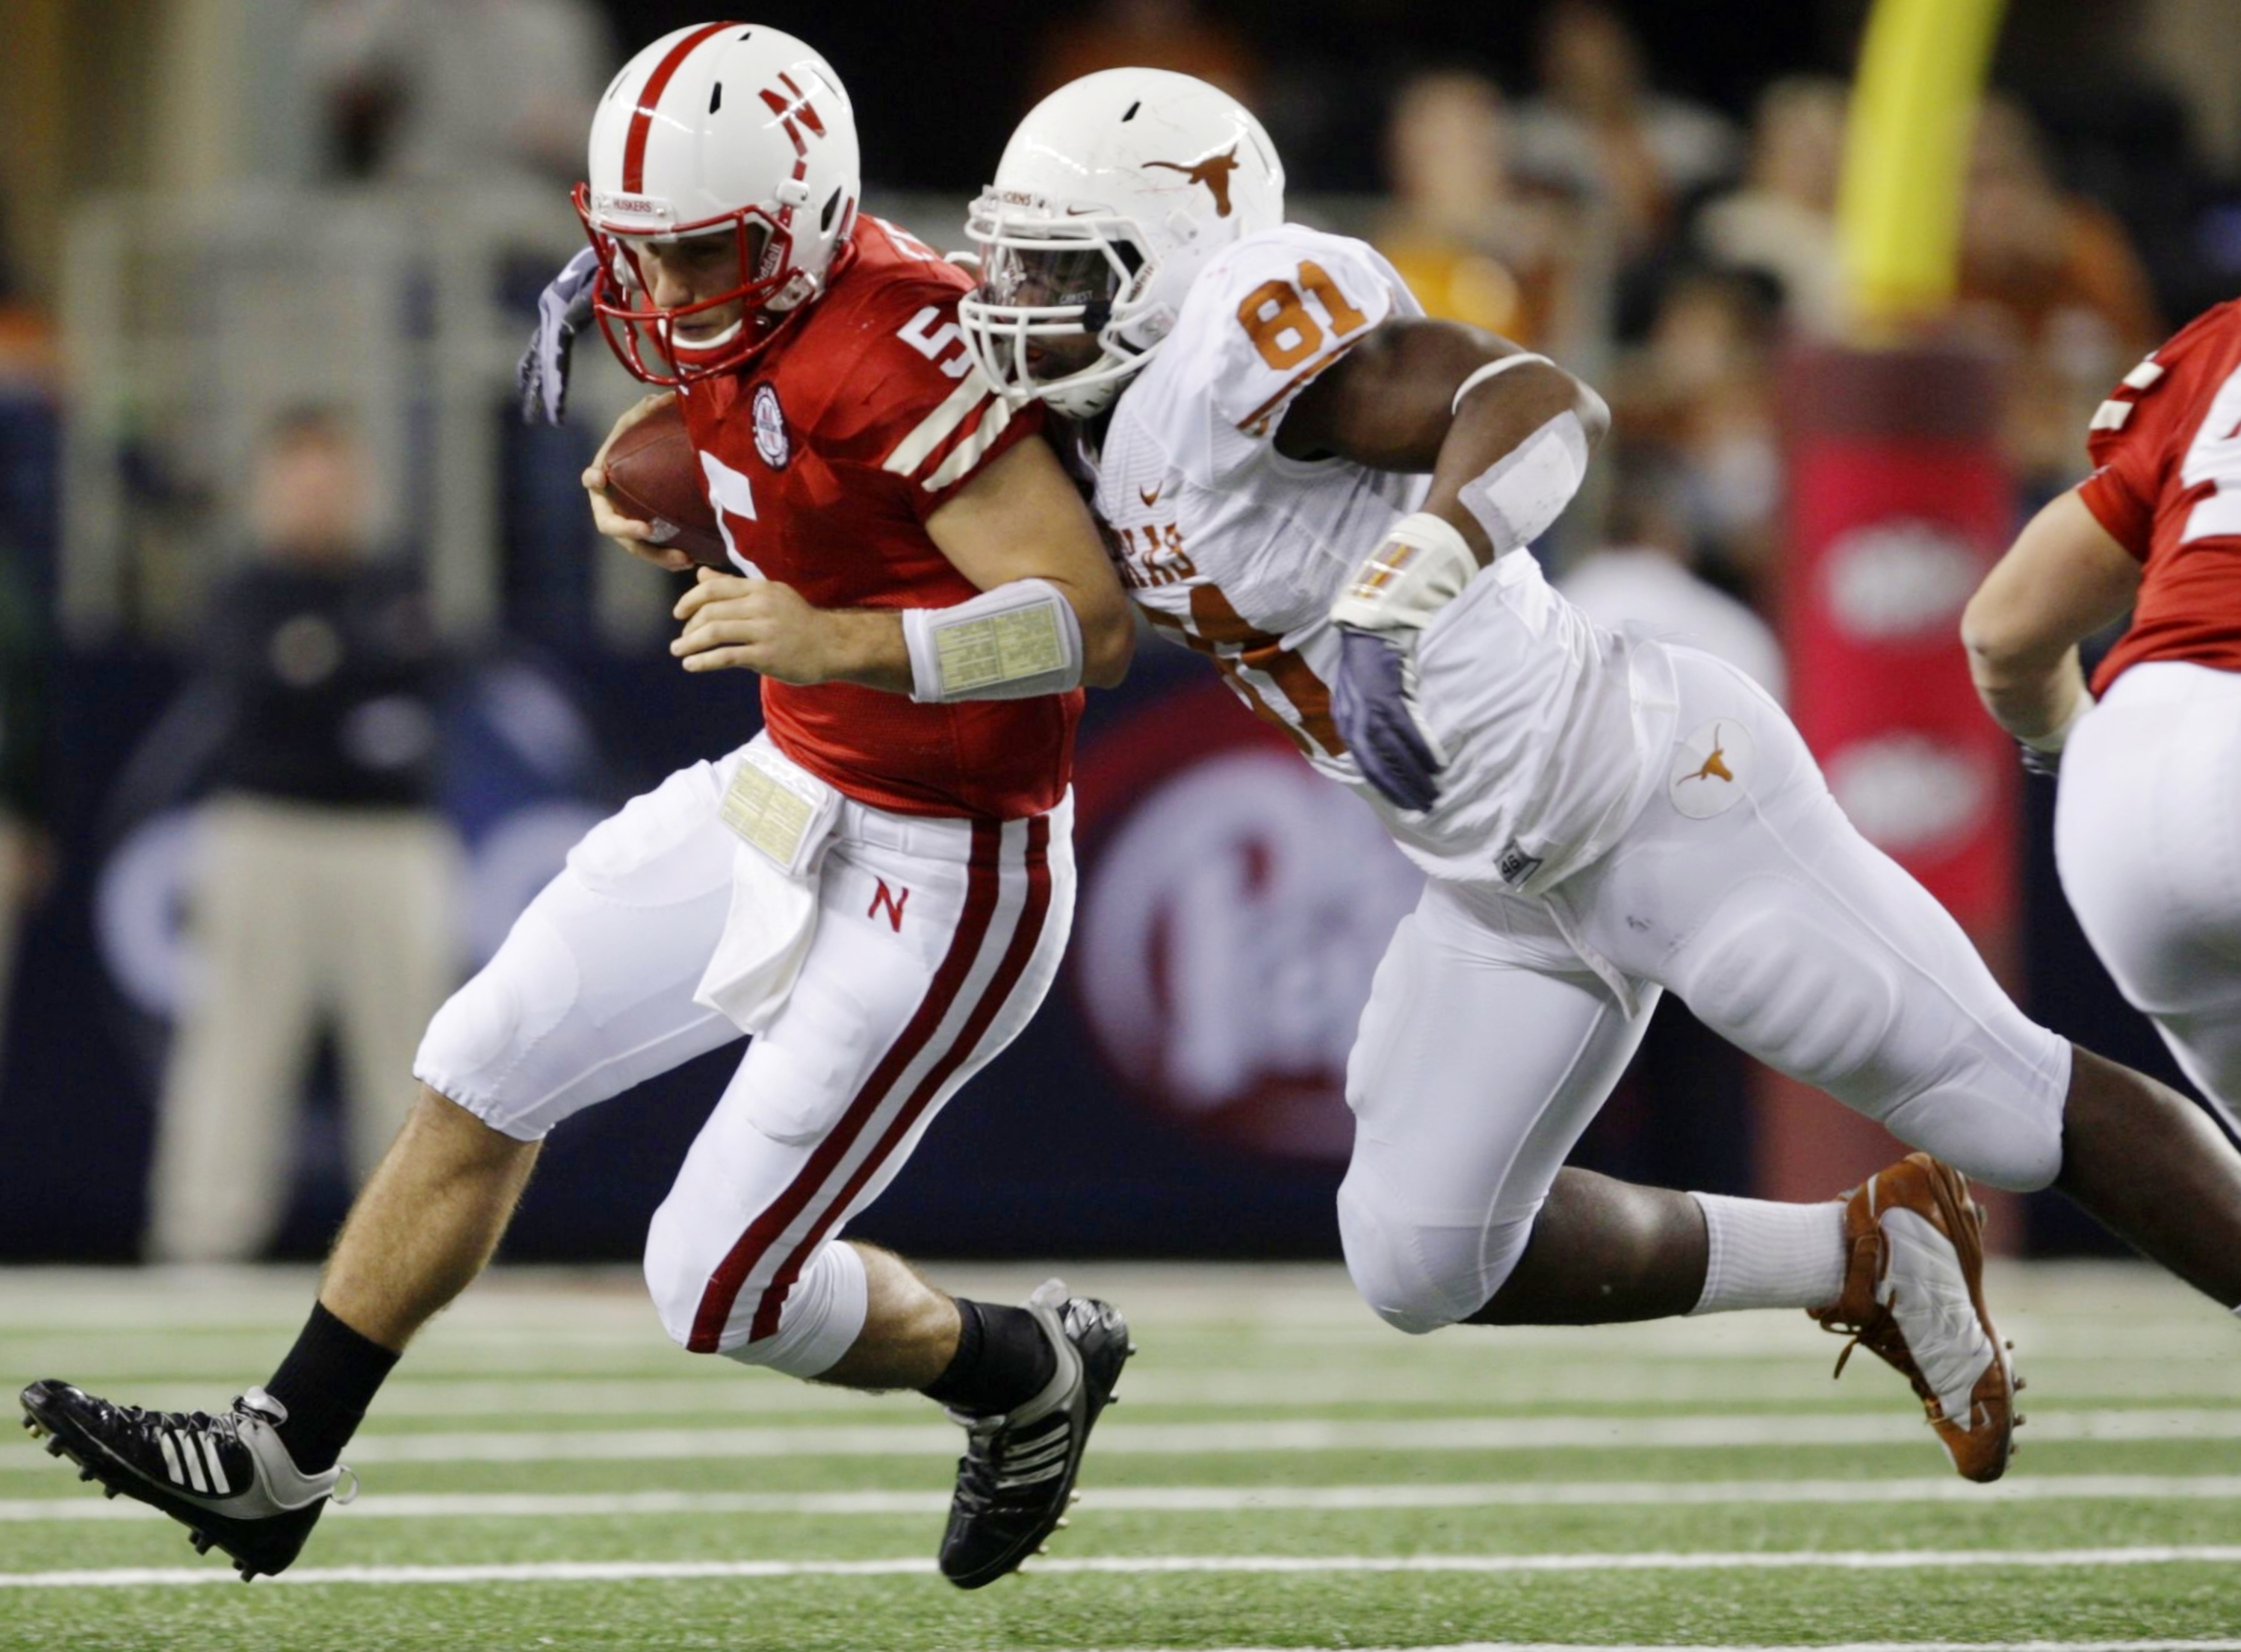 ARLINGTON, TX - DECEMBER 5: Quarterback Zac Lee of the Nebraska Cornhuskers is sacked by Sam Acho #81 of the Texas Longhorns at Cowboys Stadium on December 5, 2009 in Arlington, Texas. (Photo by Jamie Squire/Getty Images)